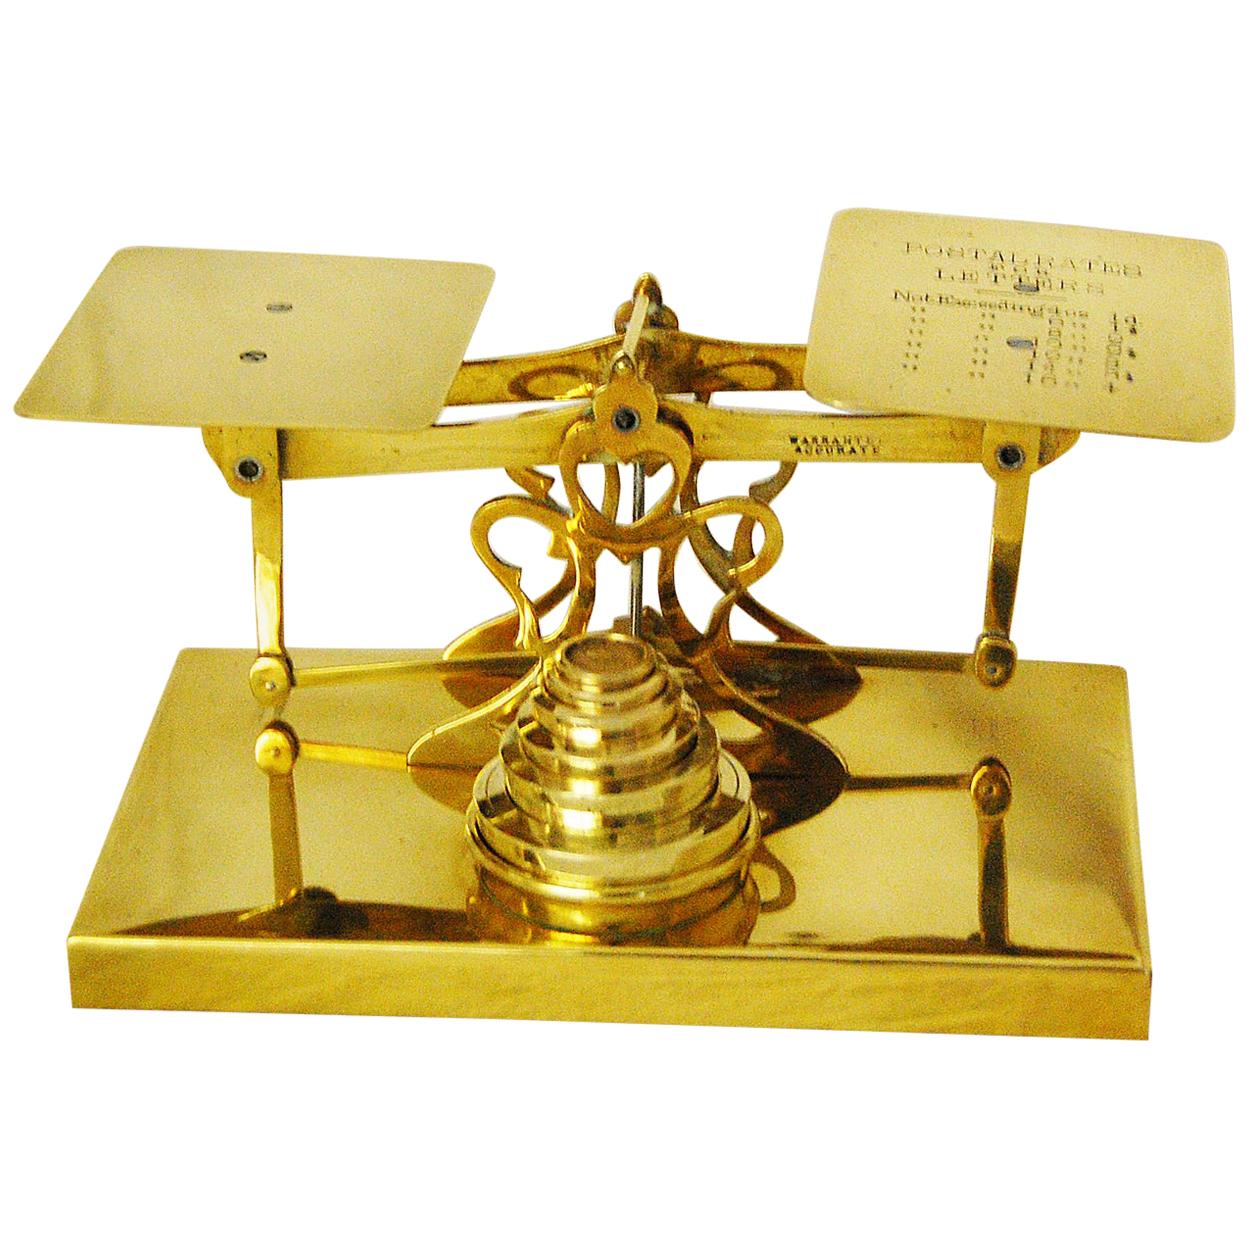 English 19th Century Brass Postal Scale on Brass Base by Sturner & Sons